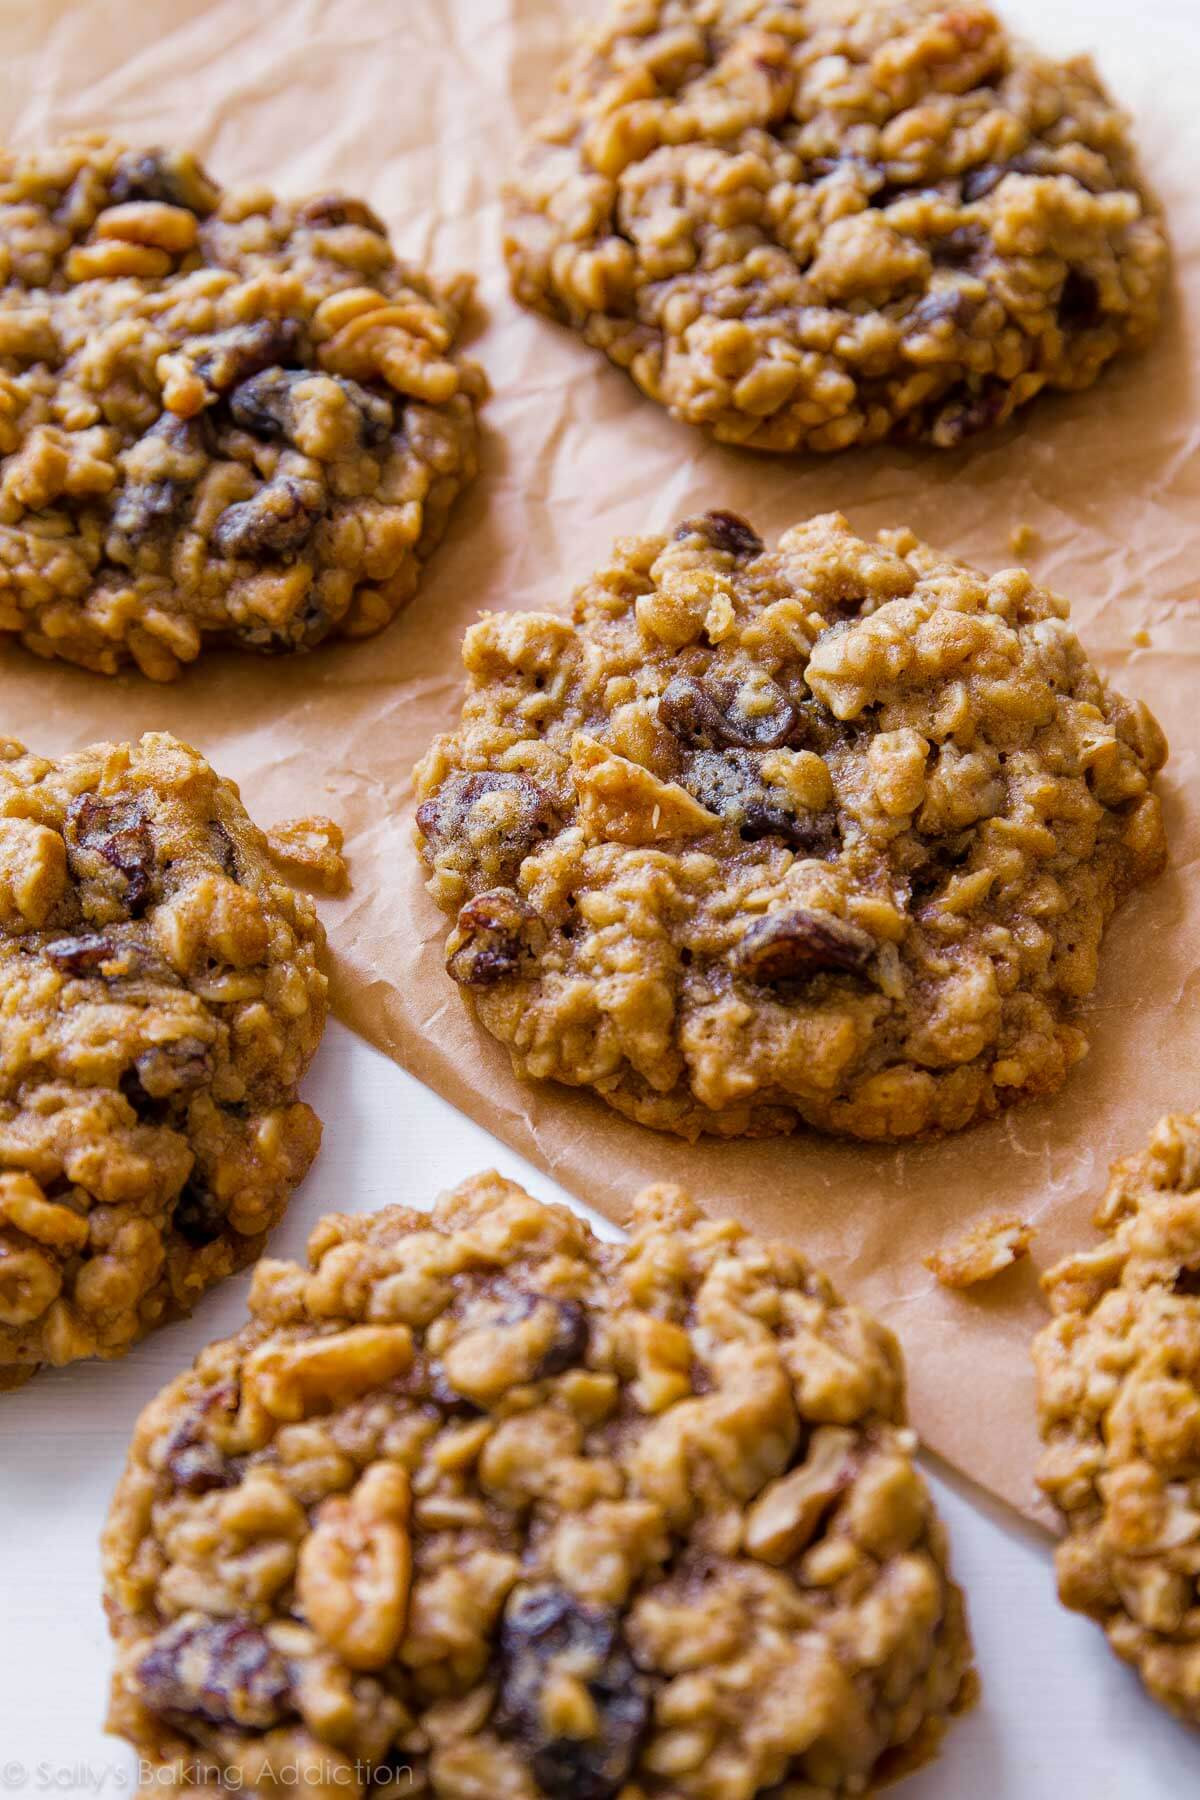 Recipe For Oatmeal Cookies
 Soft & Chewy Oatmeal Raisin Cookies Sallys Baking Addiction